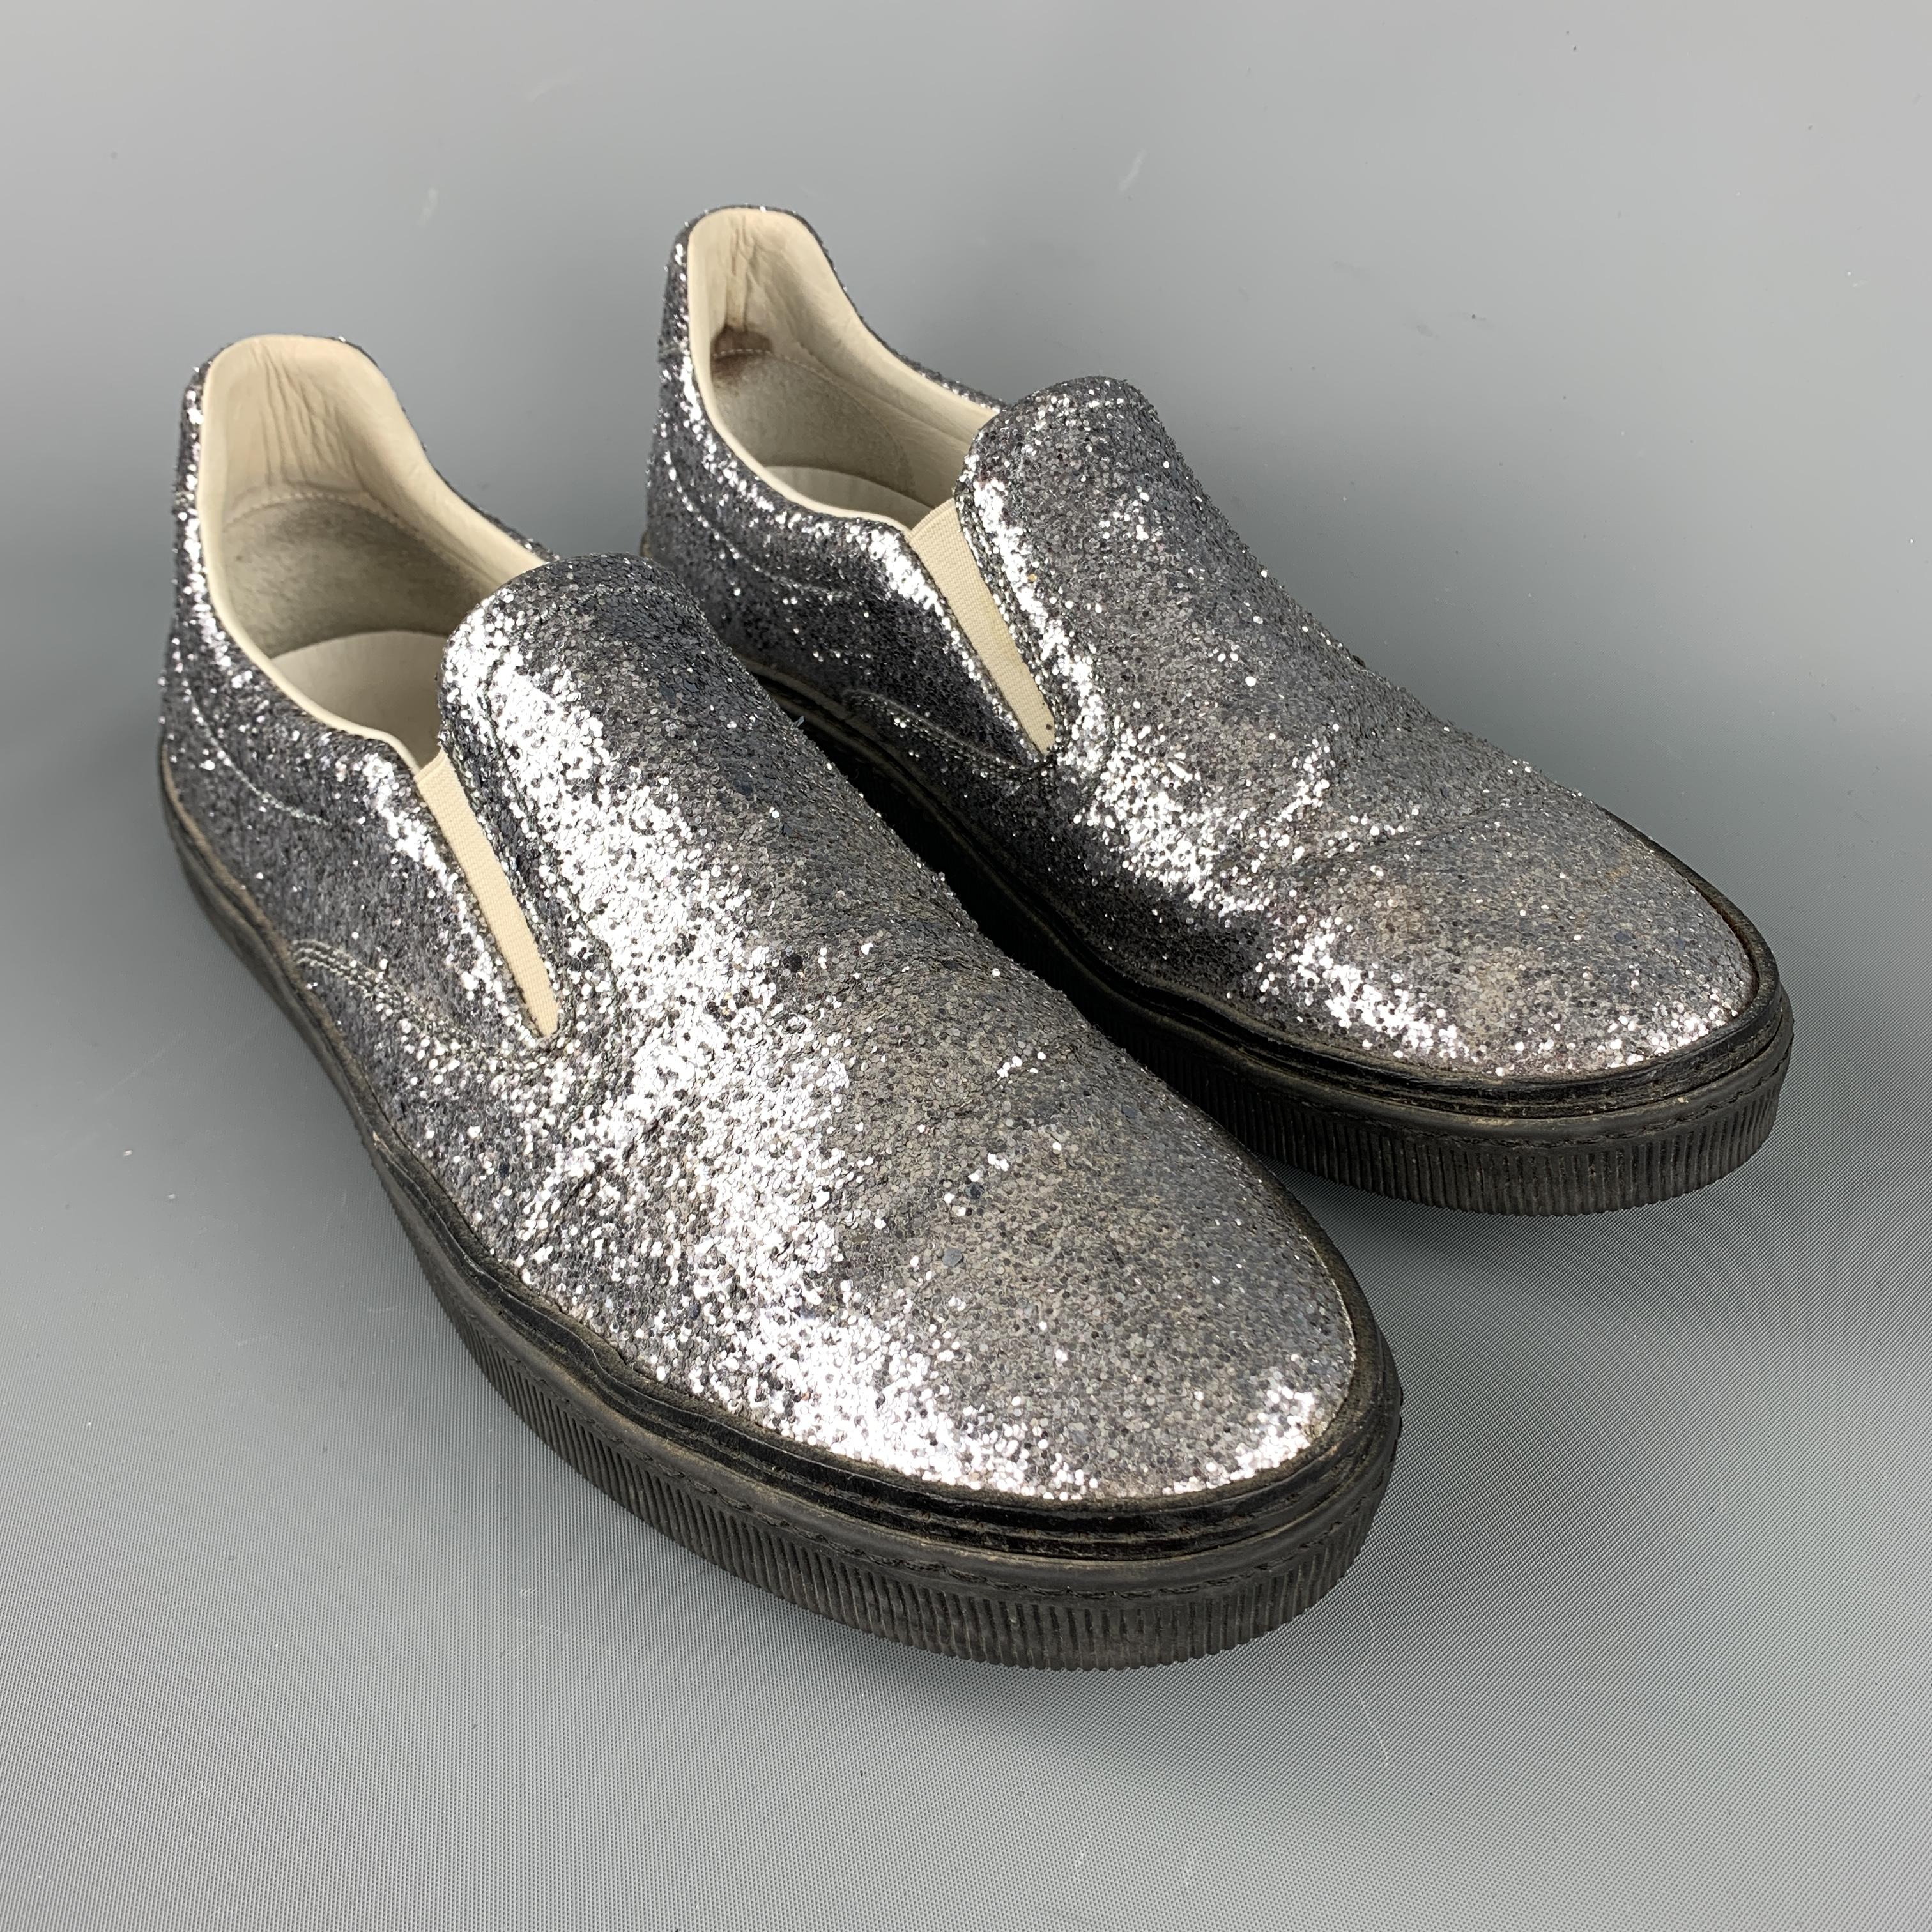 MAISON MARTIN MARGIELA sneakers comes in silver glitter material, slip on, with a rubber sole. Made in Italy.

Very Good Pre-Owned Condition.
Marked: IT 43

Outsole: 12 x 4 in.